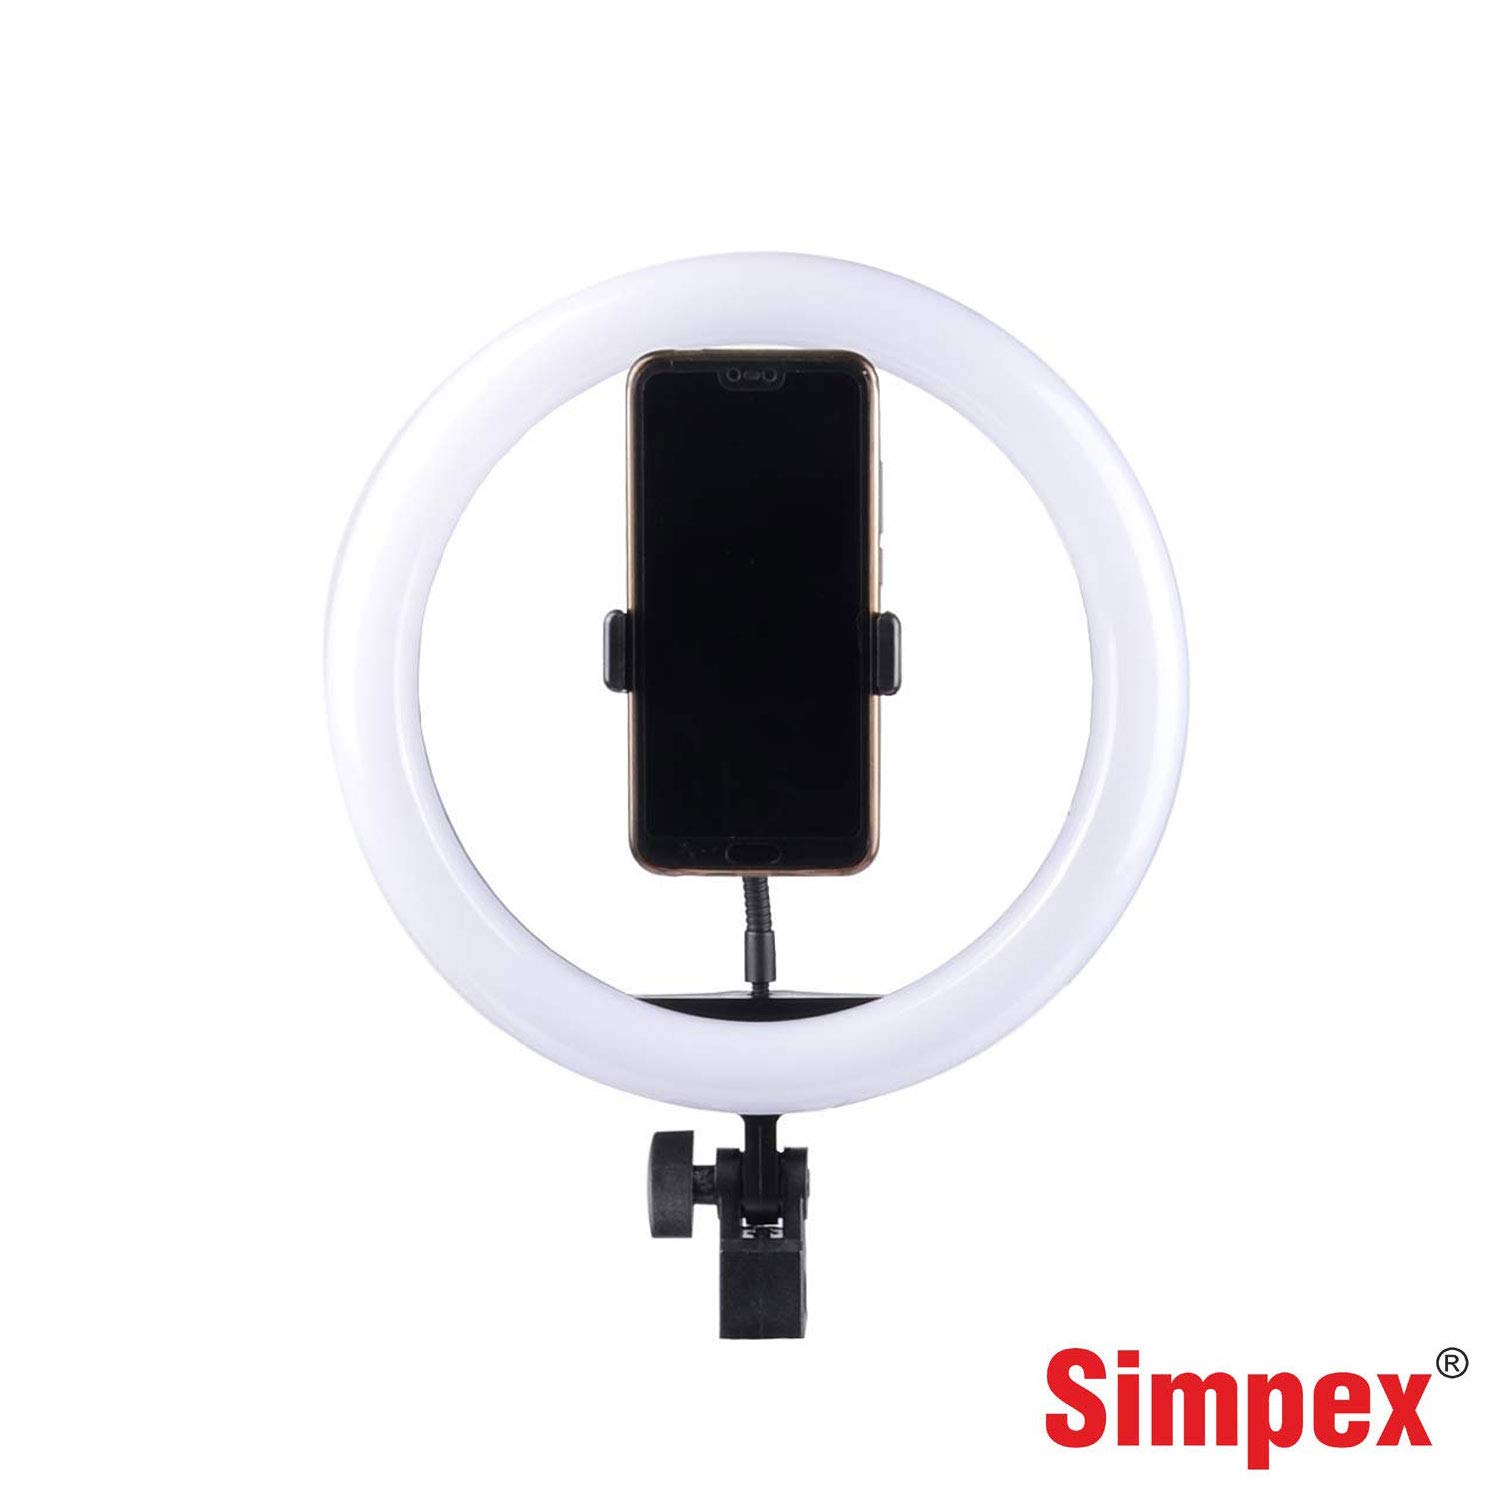 Simpex Ring led 12 inch Professional LED Ring Light (for TIK Tok, Makeup, YouTube, Instagram)